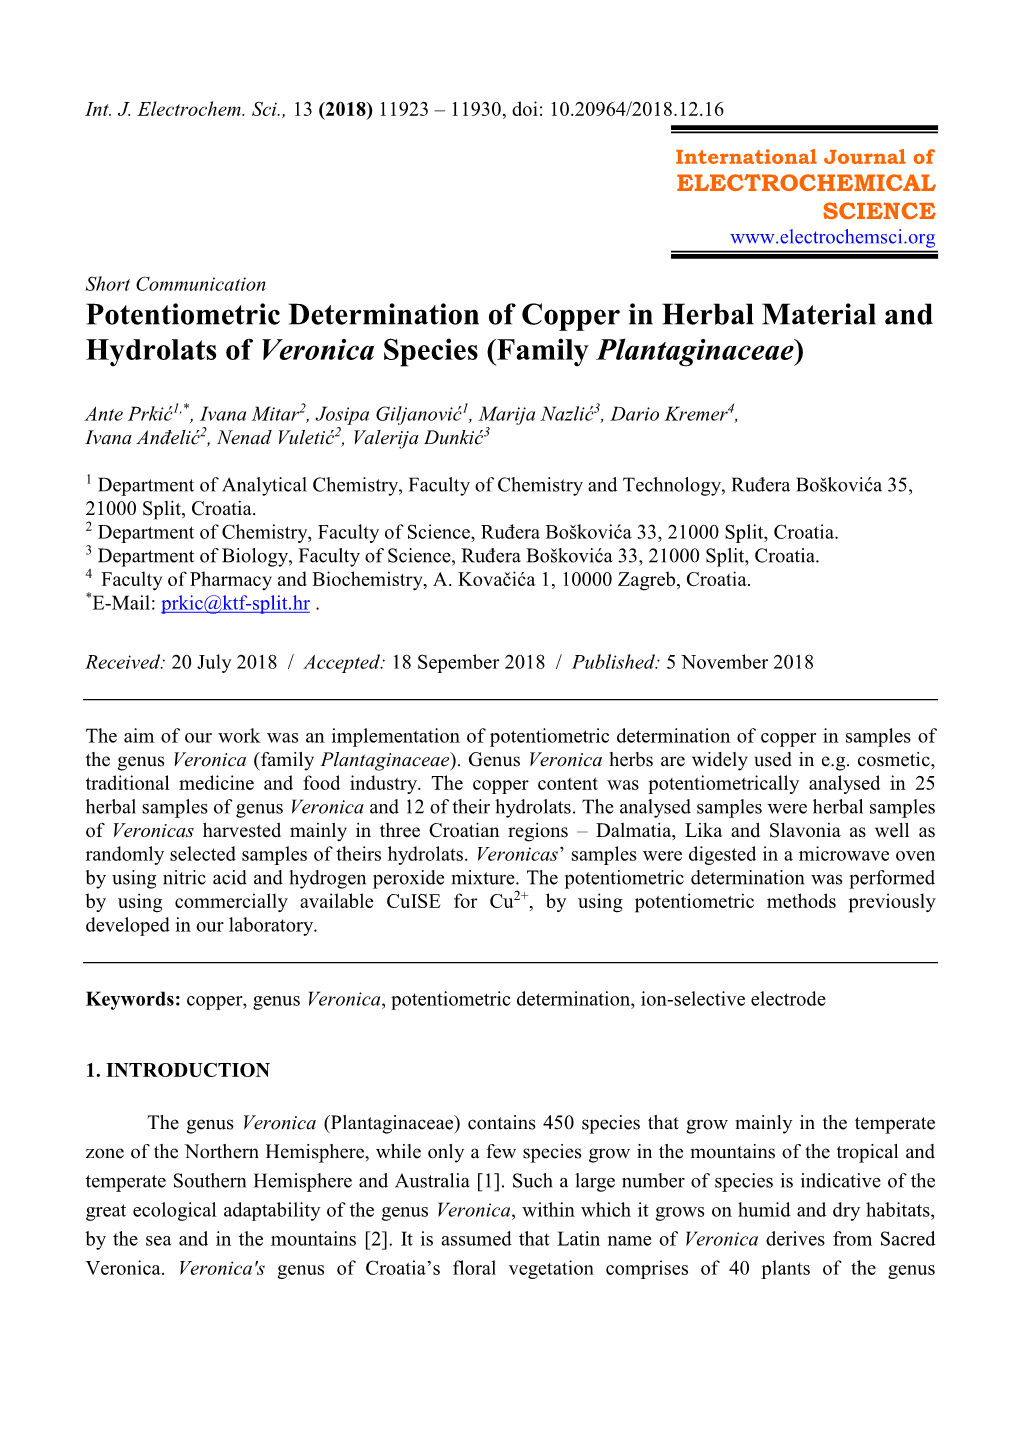 Potentiometric Determination of Copper in Herbal Material and Hydrolats of Veronica Species (Family Plantaginaceae)